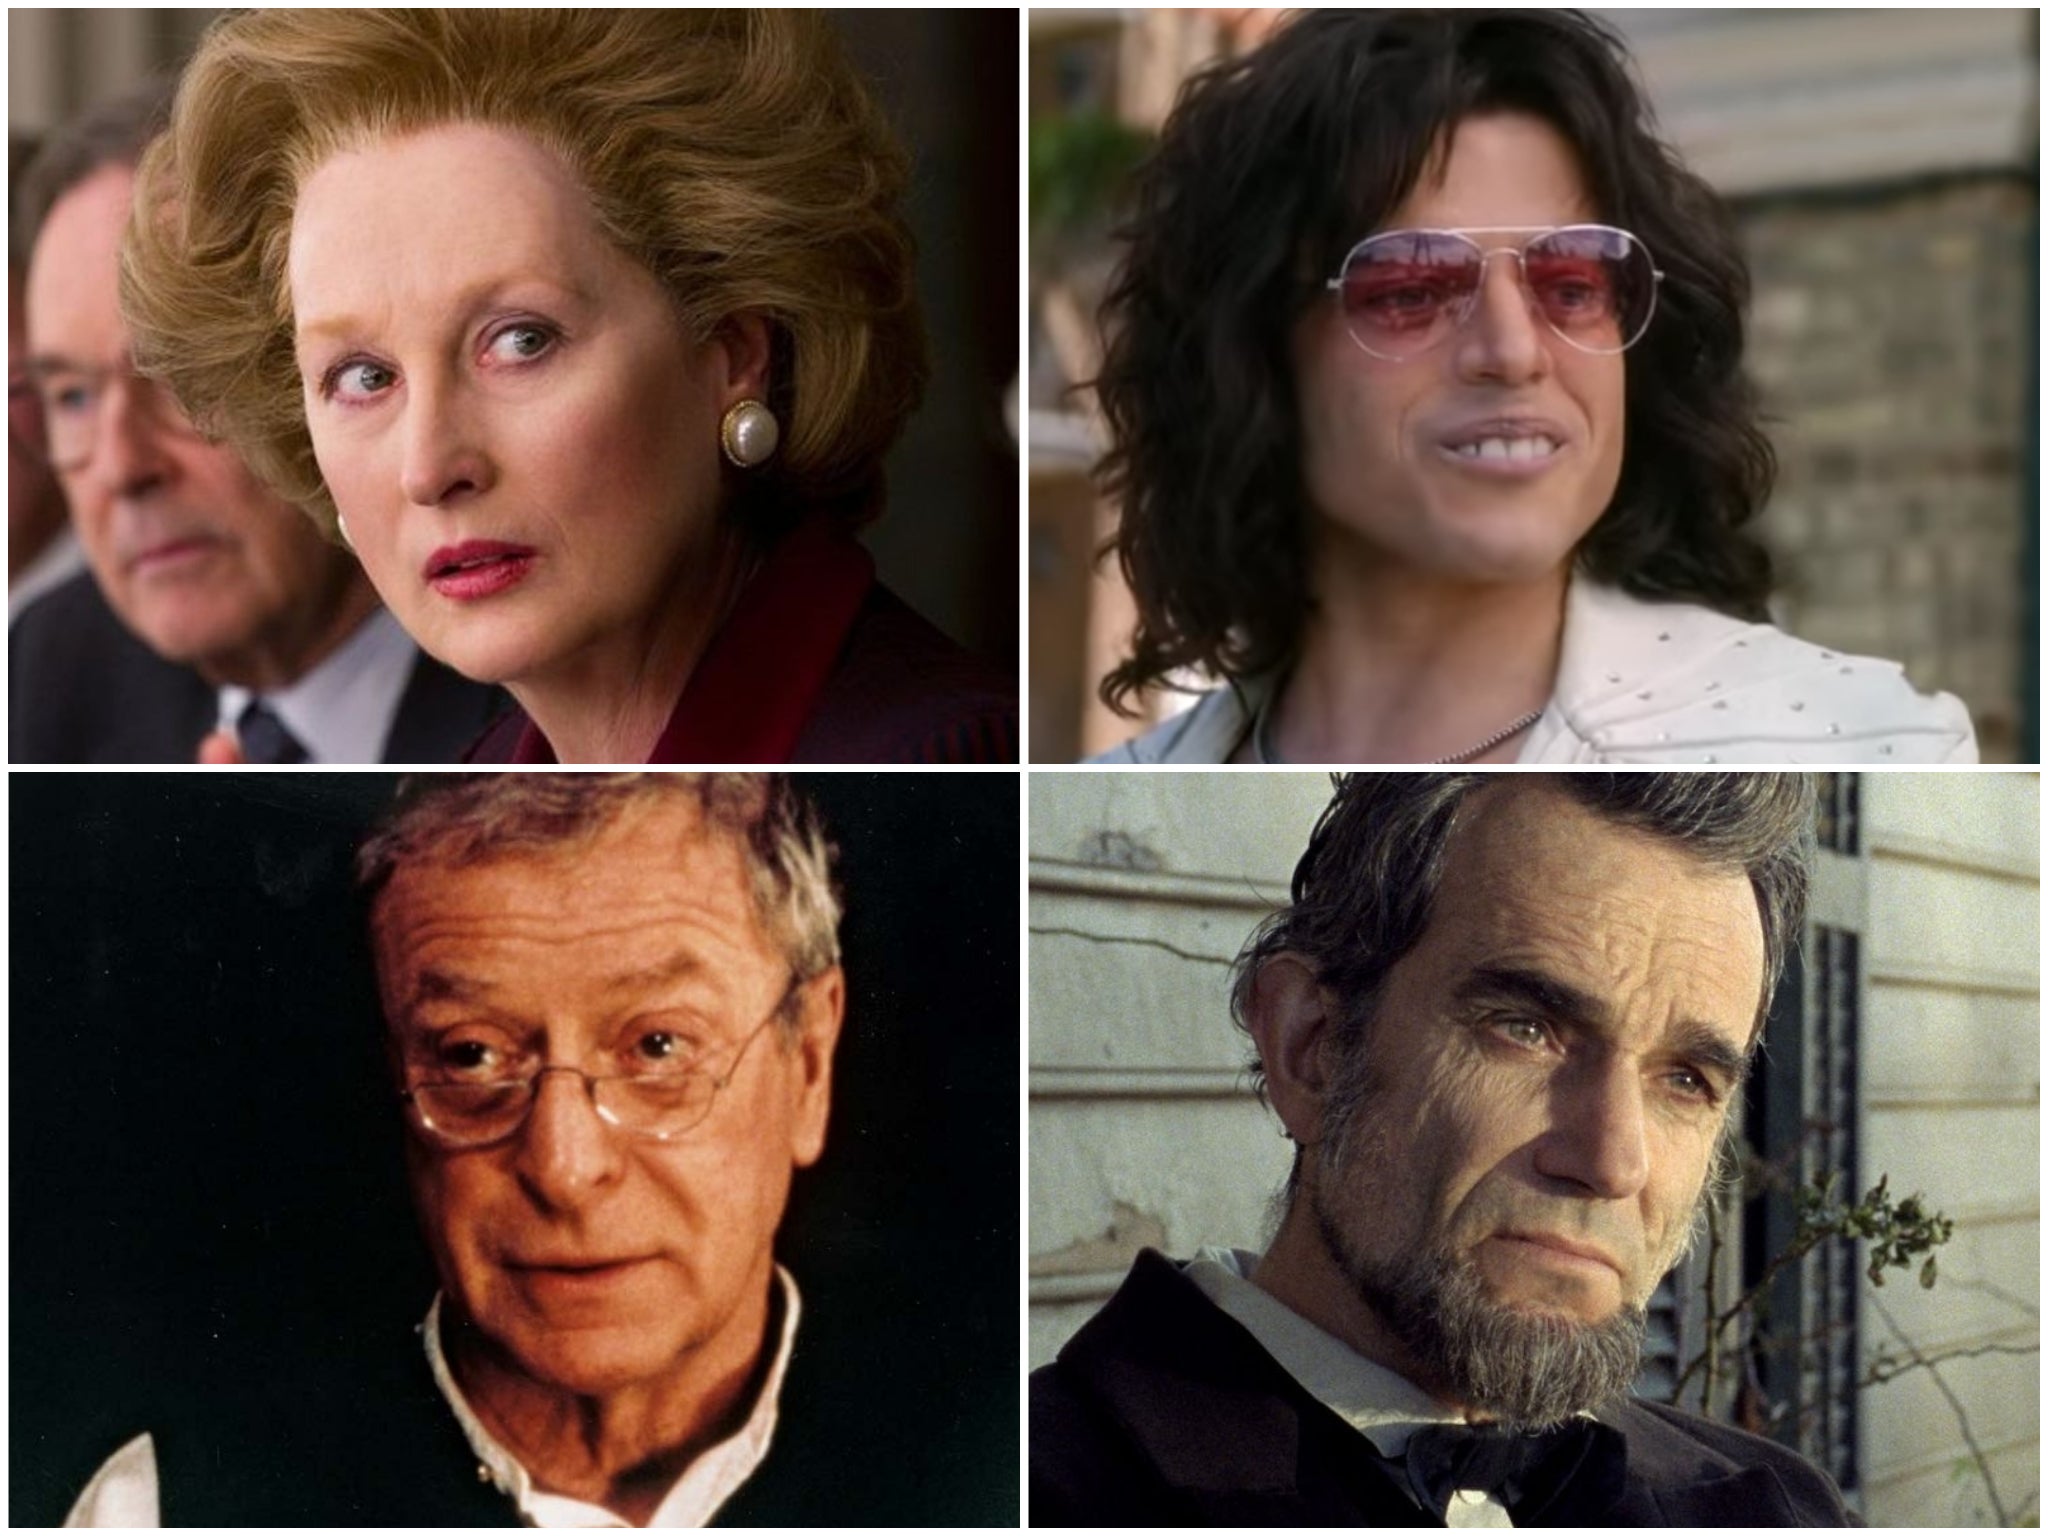 Clockwise from top right: Rami Malek, Daniel Day-Lewis, Michael Caine and Meryl Streep